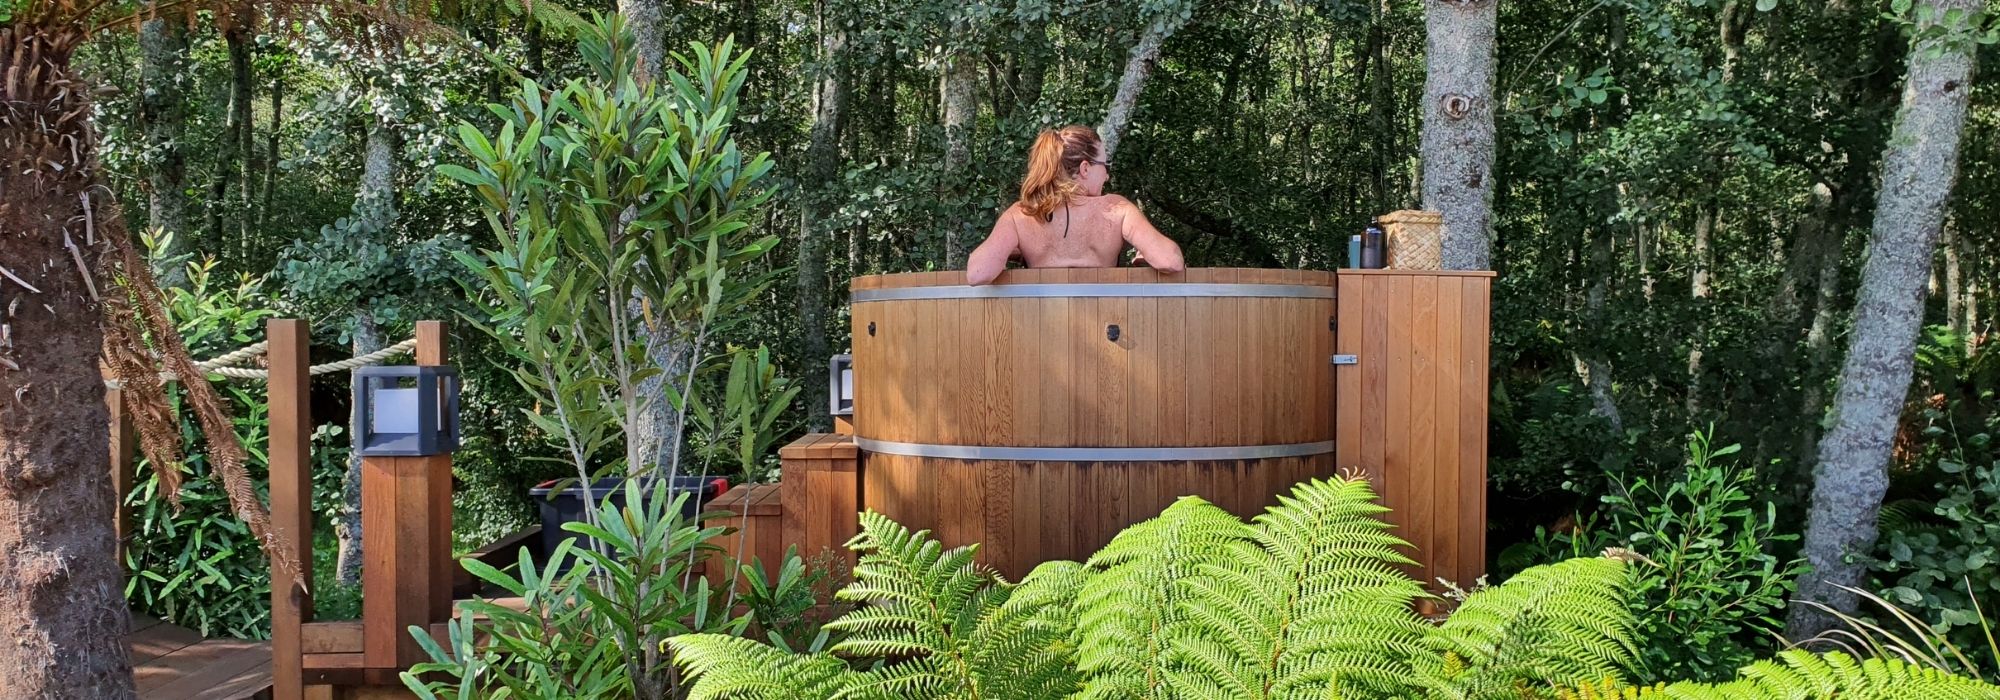 Get yourself into hot water in Rotorua